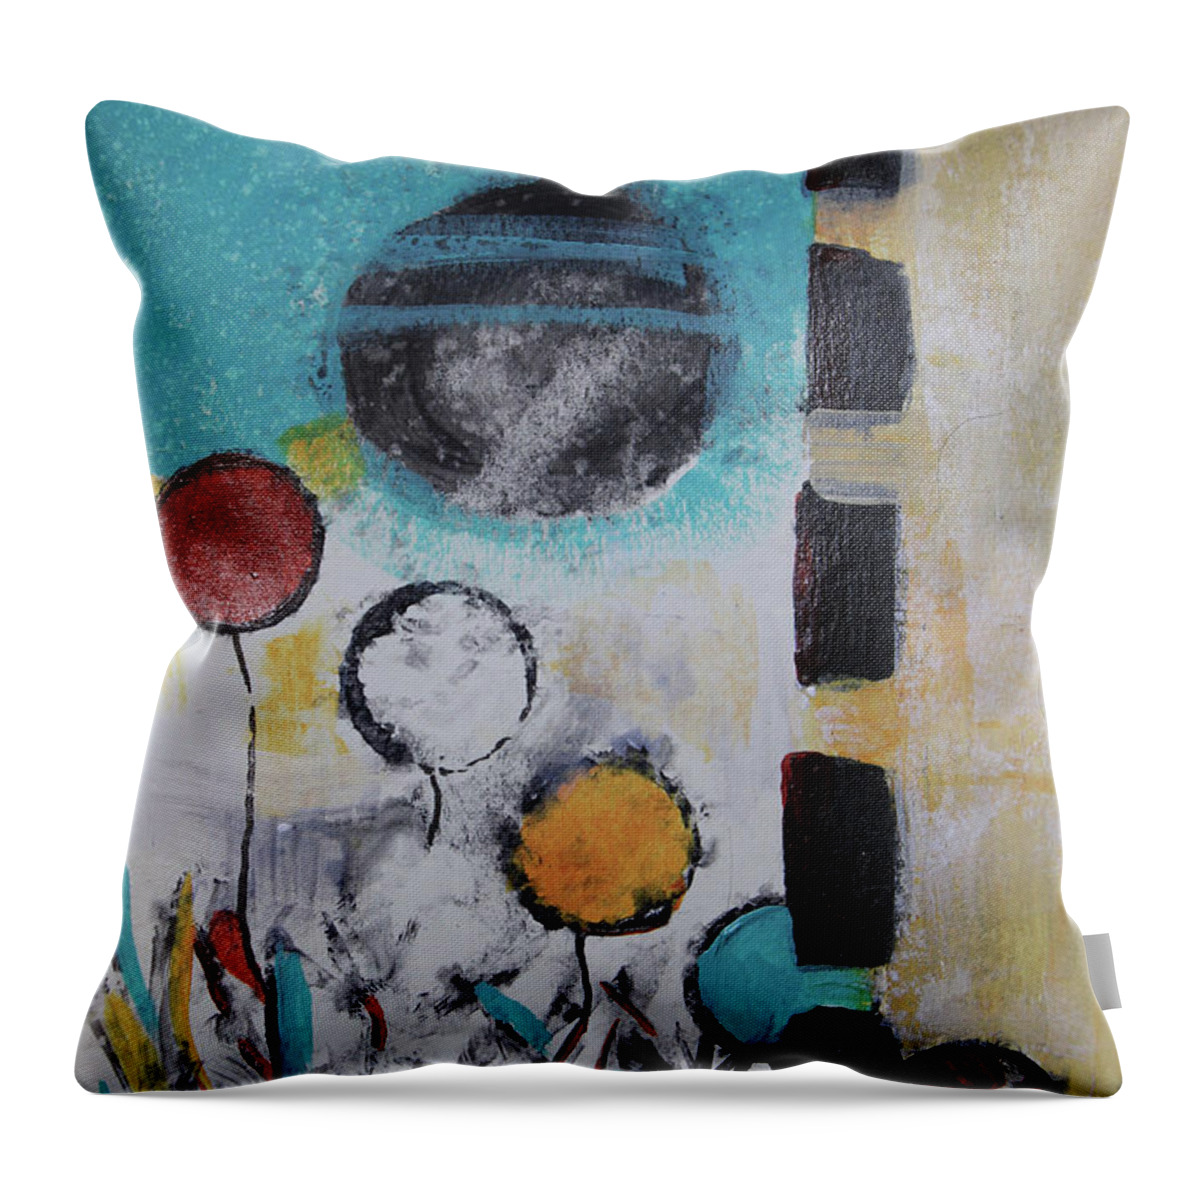 Flowers Throw Pillow featuring the mixed media Morning Flowers by April Burton